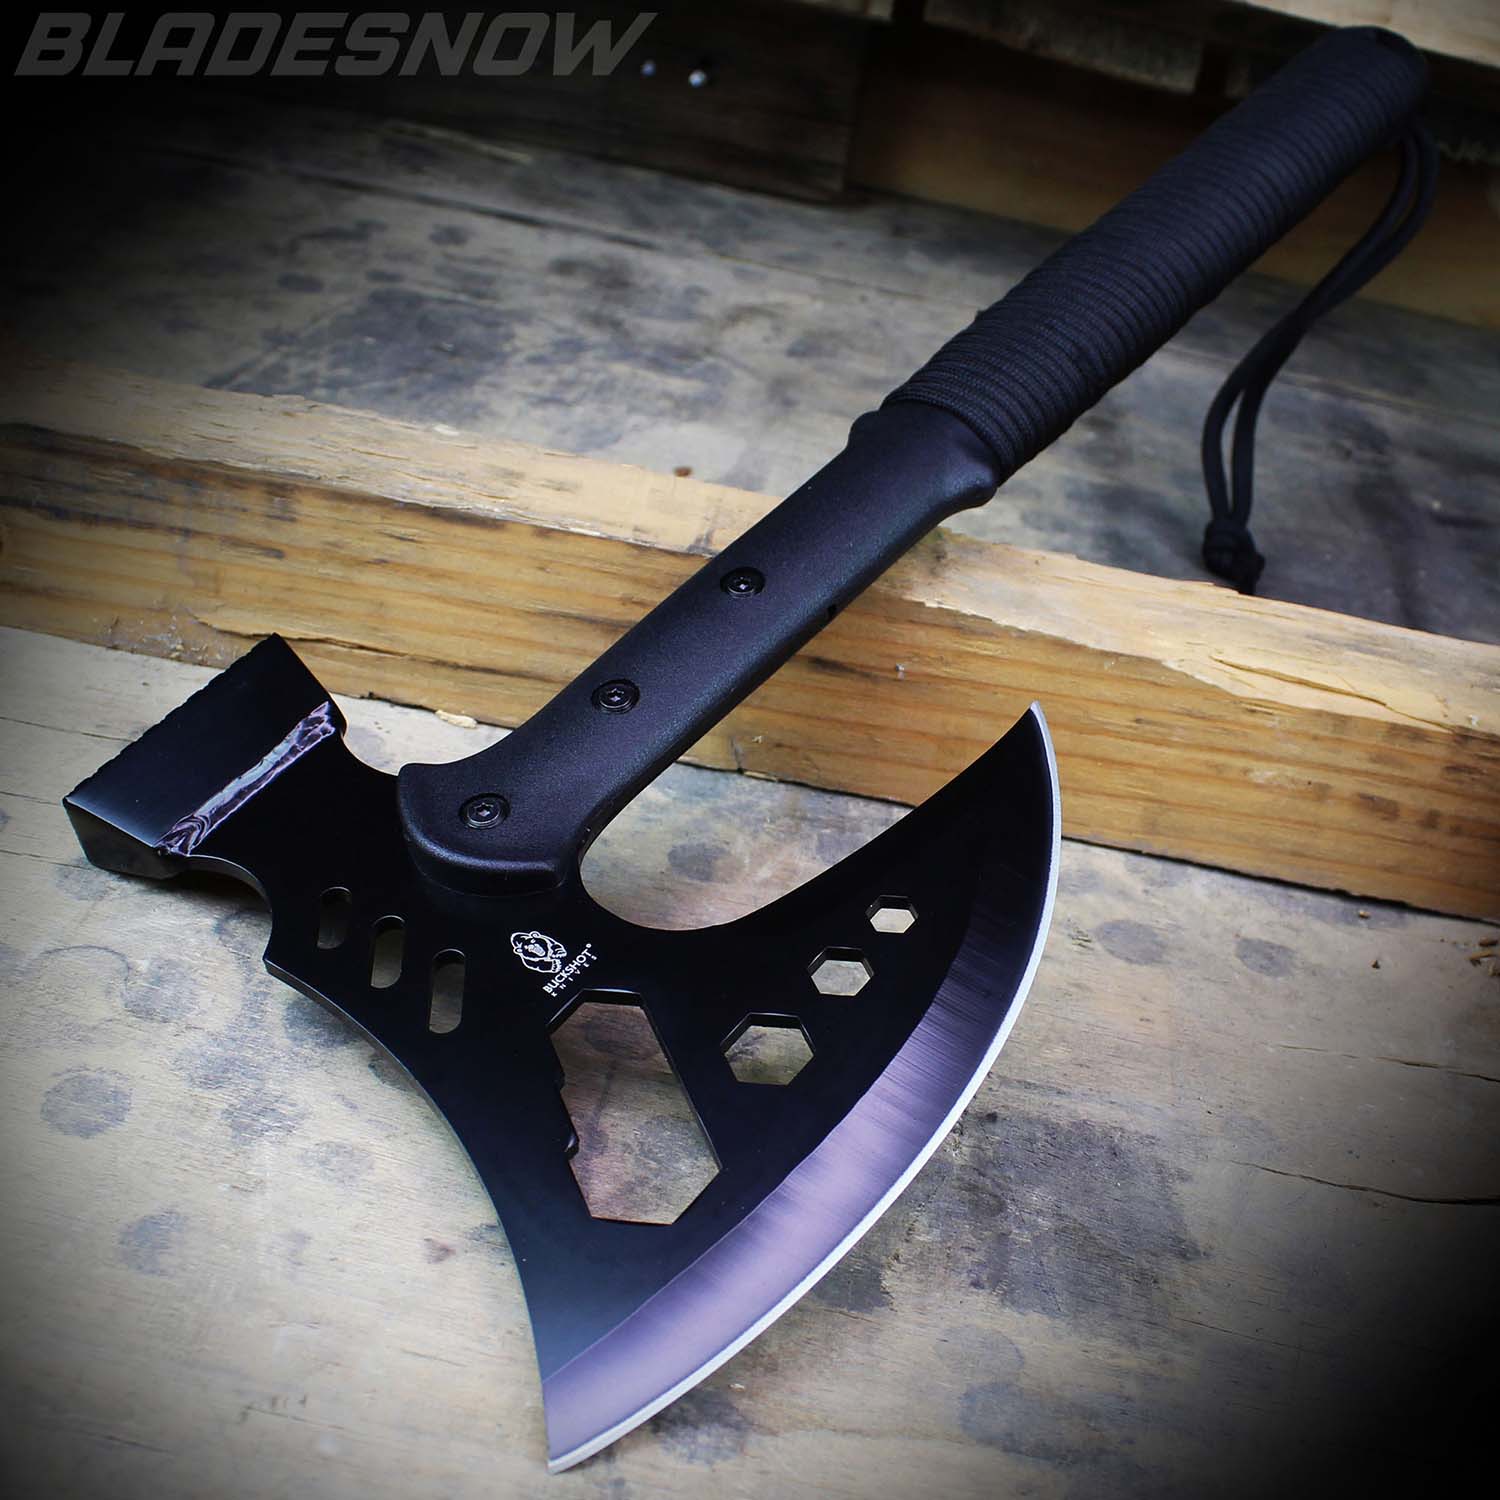 & Products Now Blades All - View 2 Swords Knives |